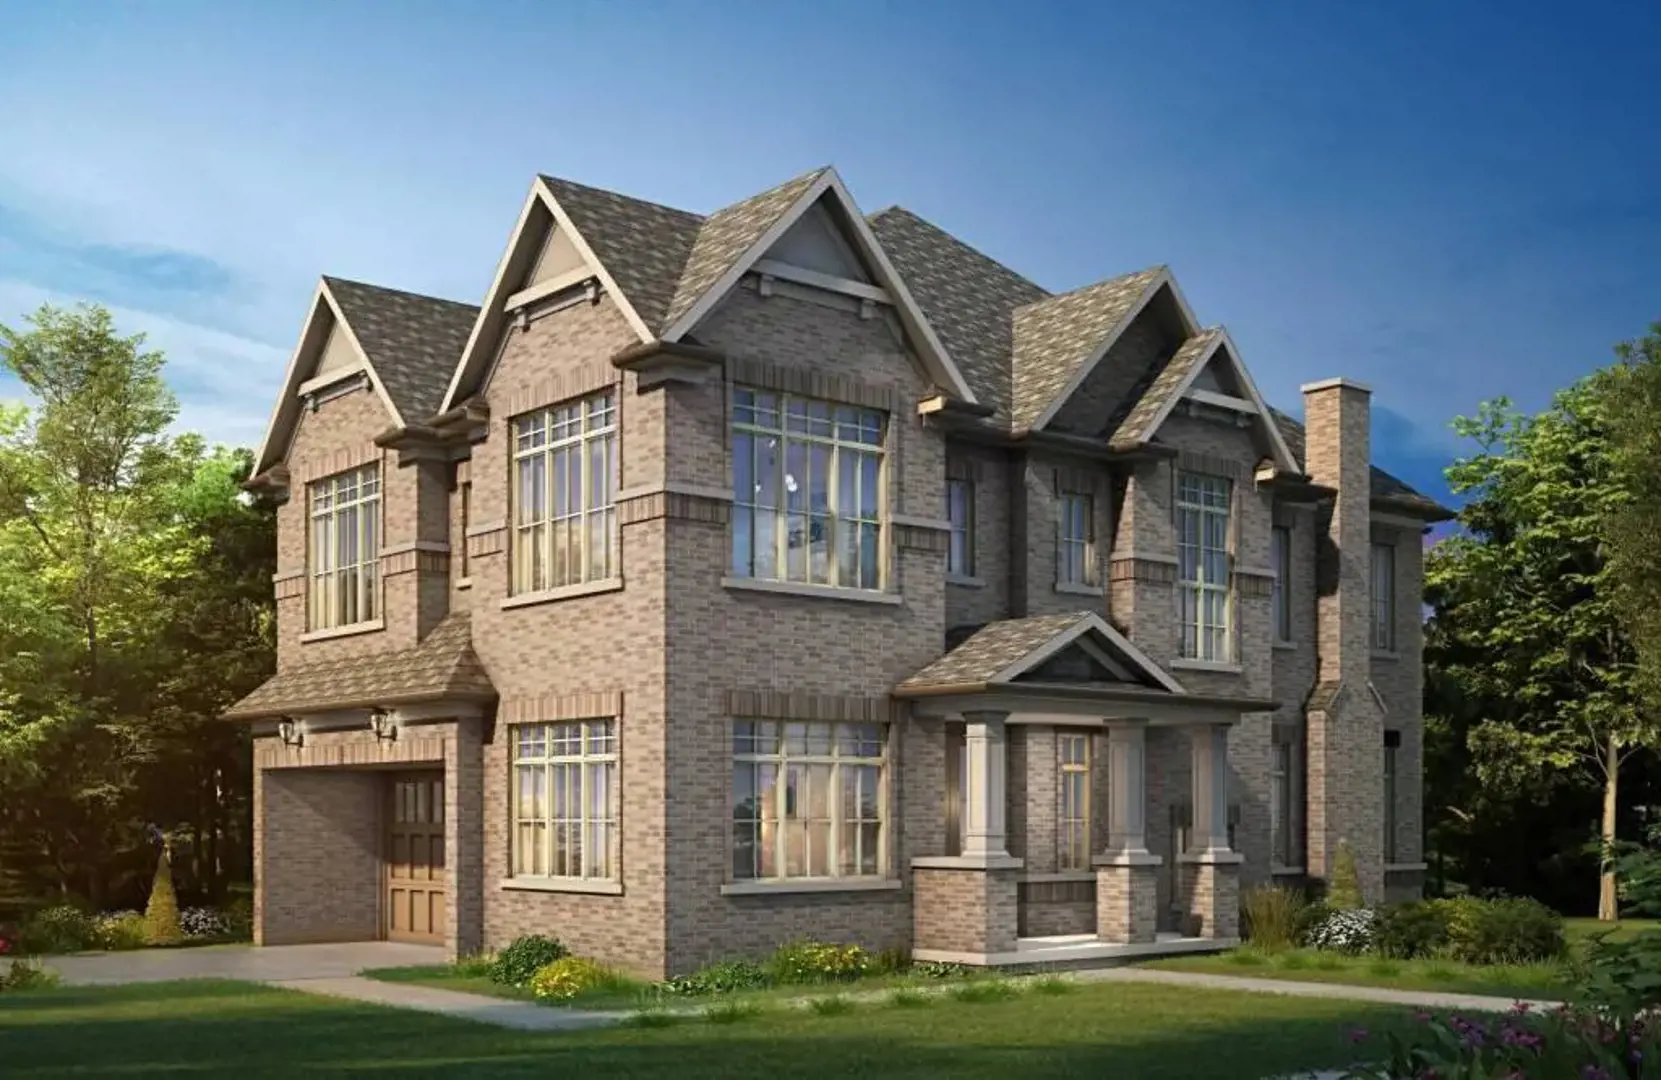 Countryside Fields - Phase 4 located at Mayfield Road & Torbram Road,  Brampton,   ON image